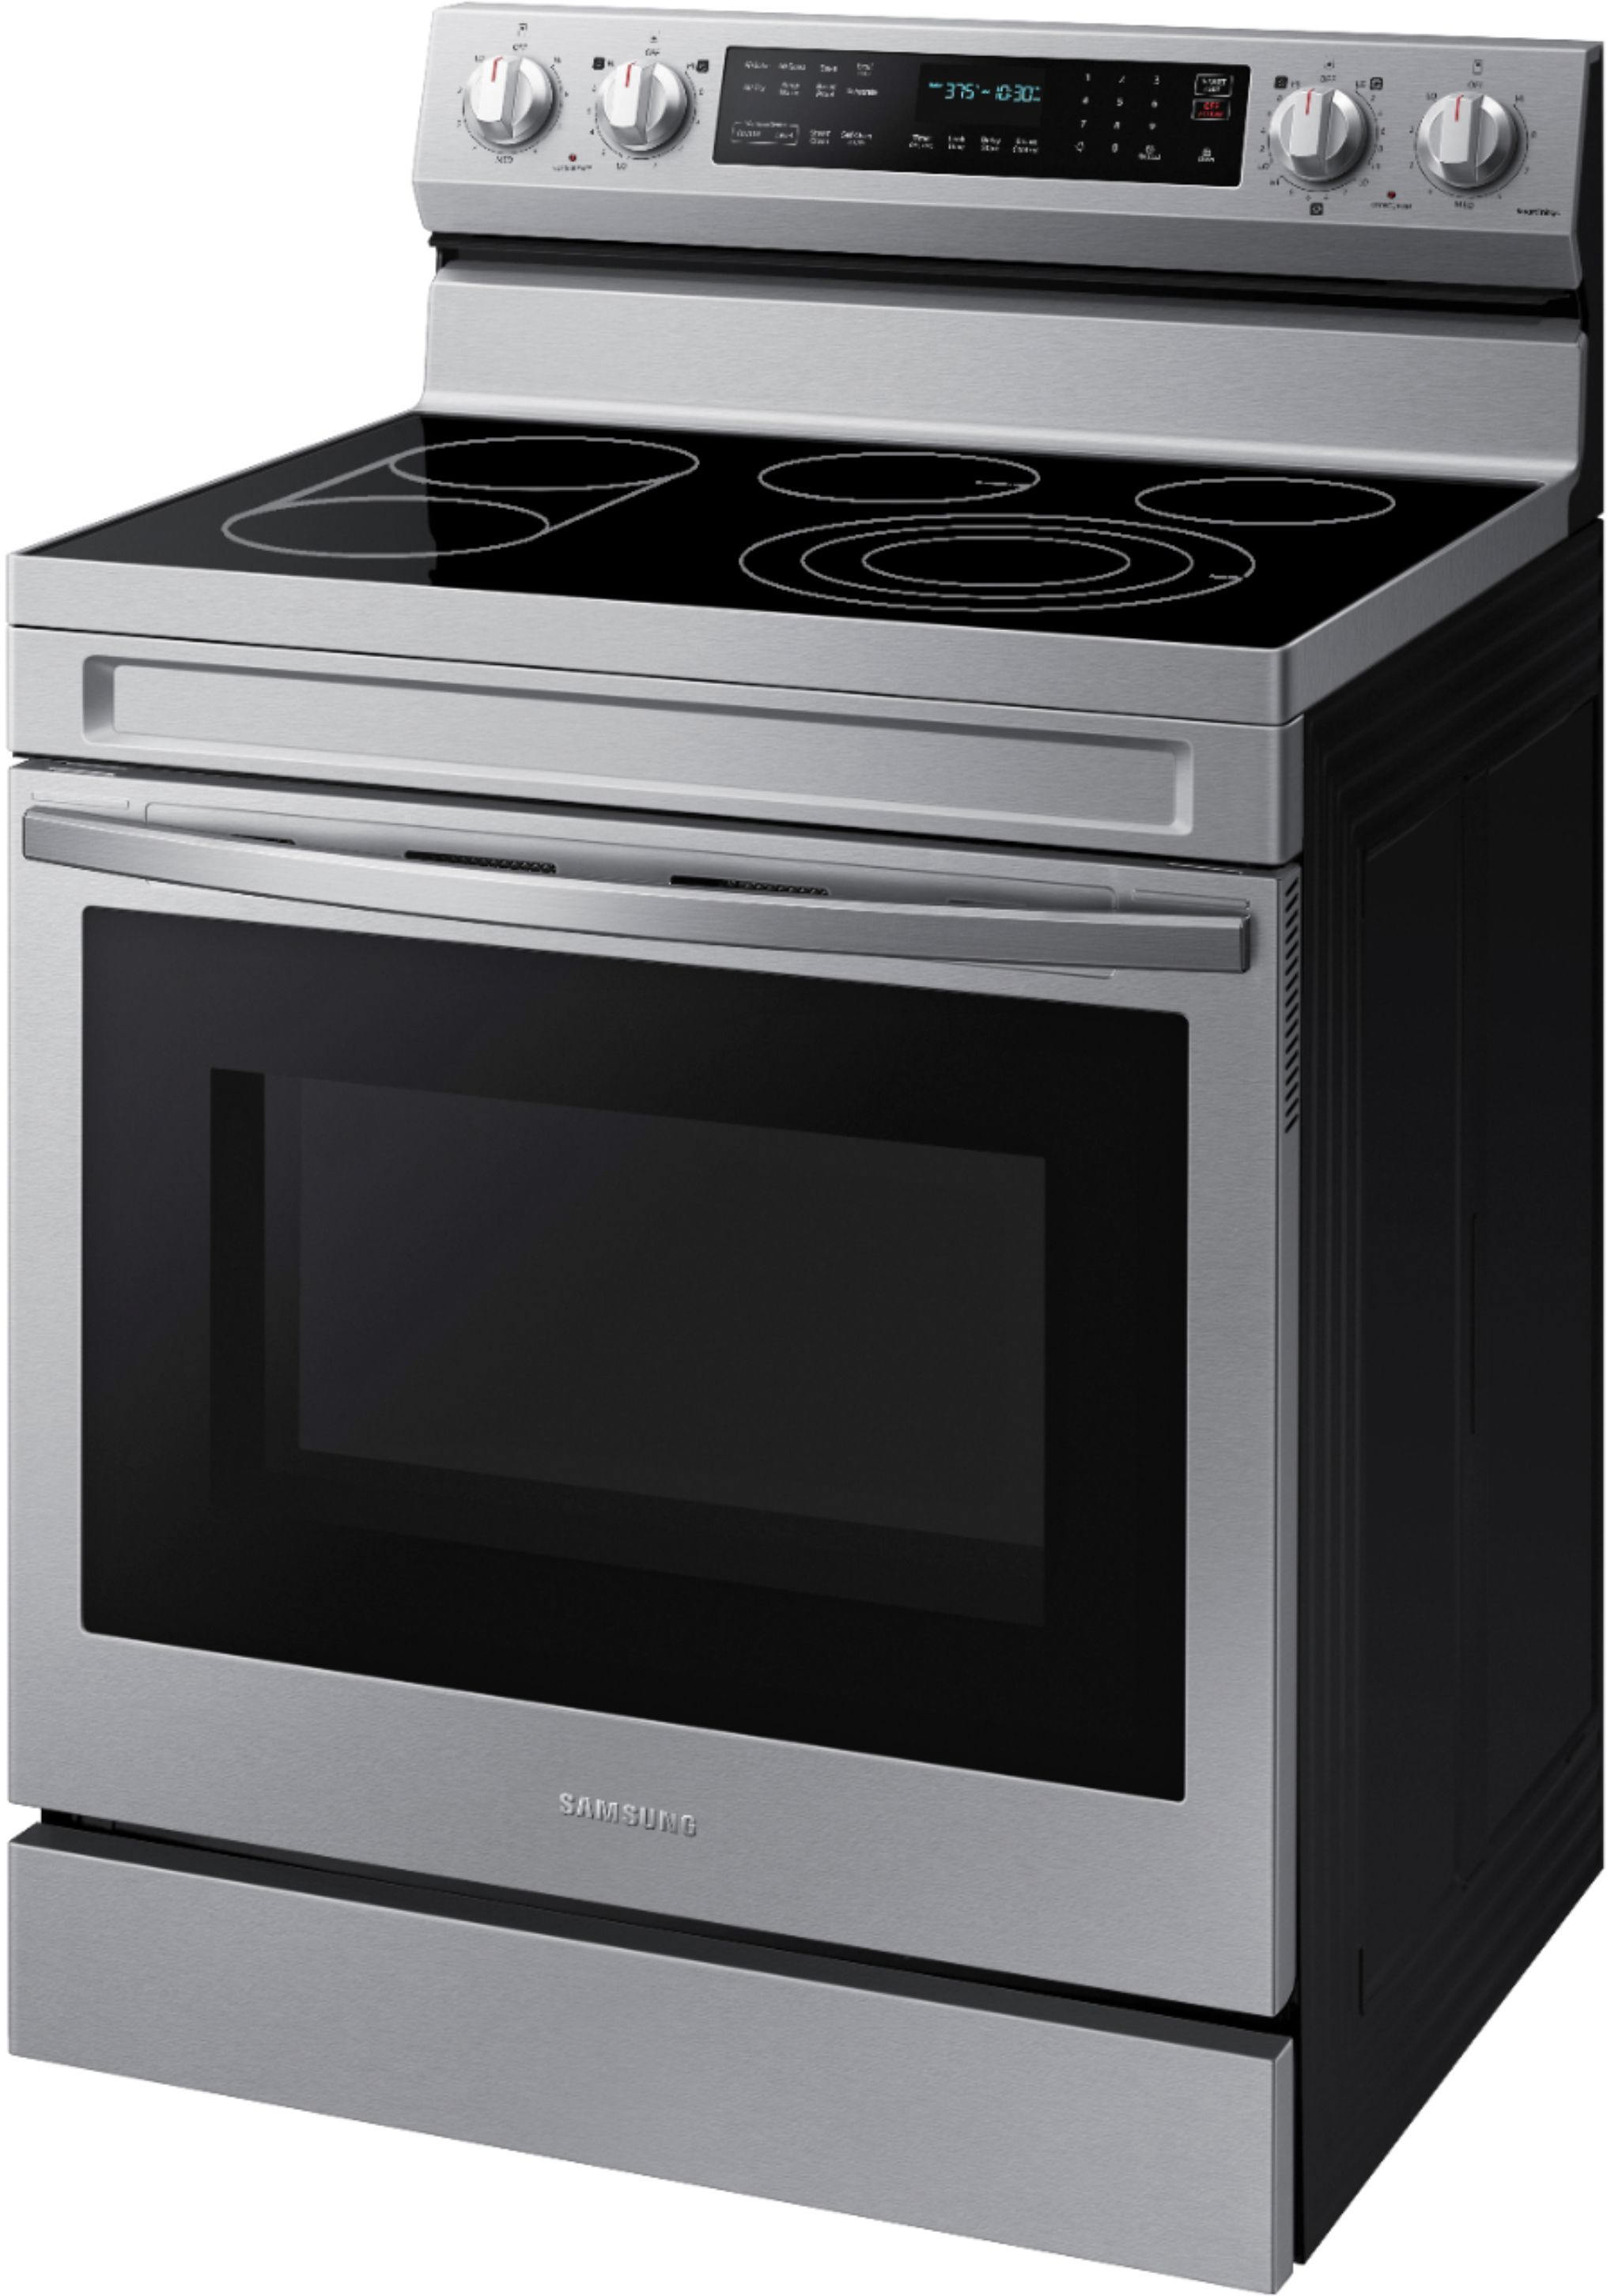 Samsung 6.3 cu. ft. Freestanding Electric Convection+ Range with WiFi,  No-Preheat Air Fry and Griddle Stainless Steel NE63A6711SS/AA - Best Buy